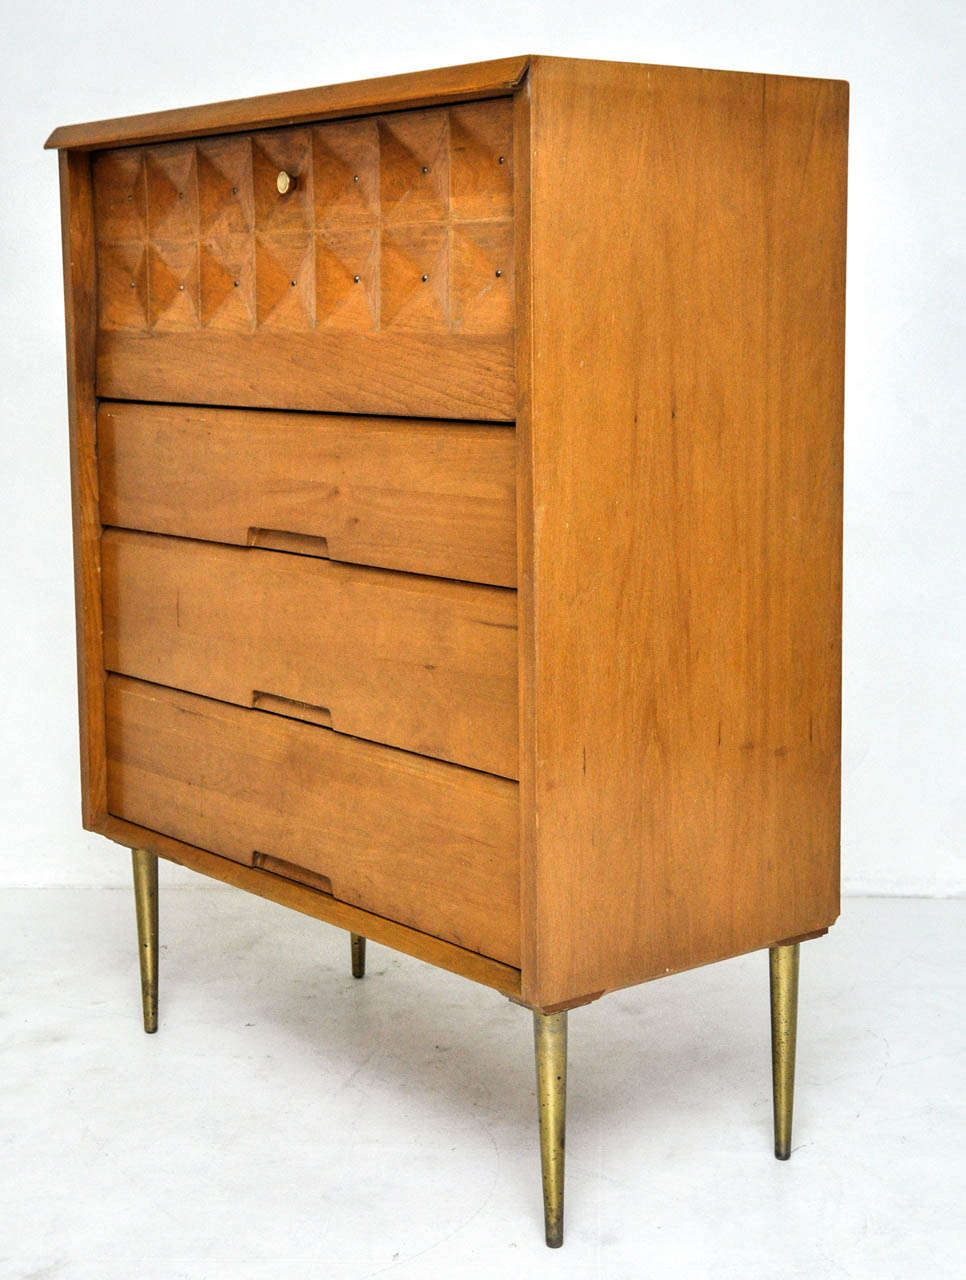 Birch highboy by  Salvatore Bevelacqua for Alliance Furniture, circa 1954. Sculpted front drop down door with brass details and legs.

**Matching sideboard available.